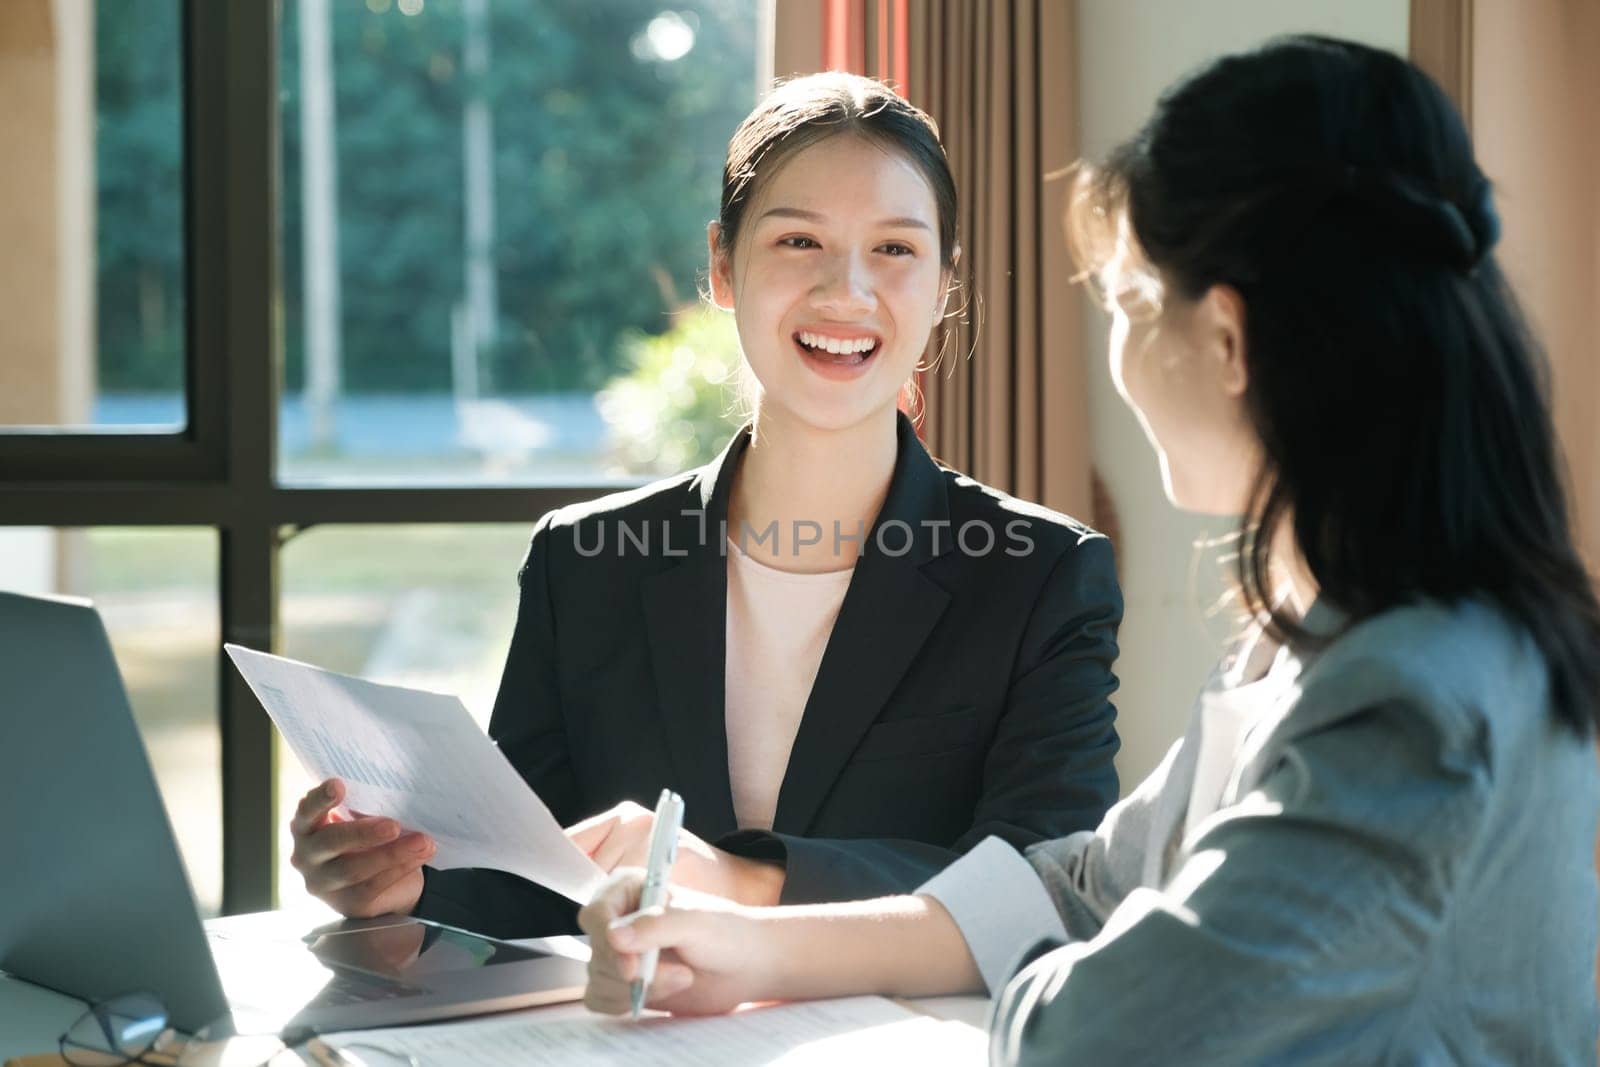 Two women in business suits are talking to each other by ijeab